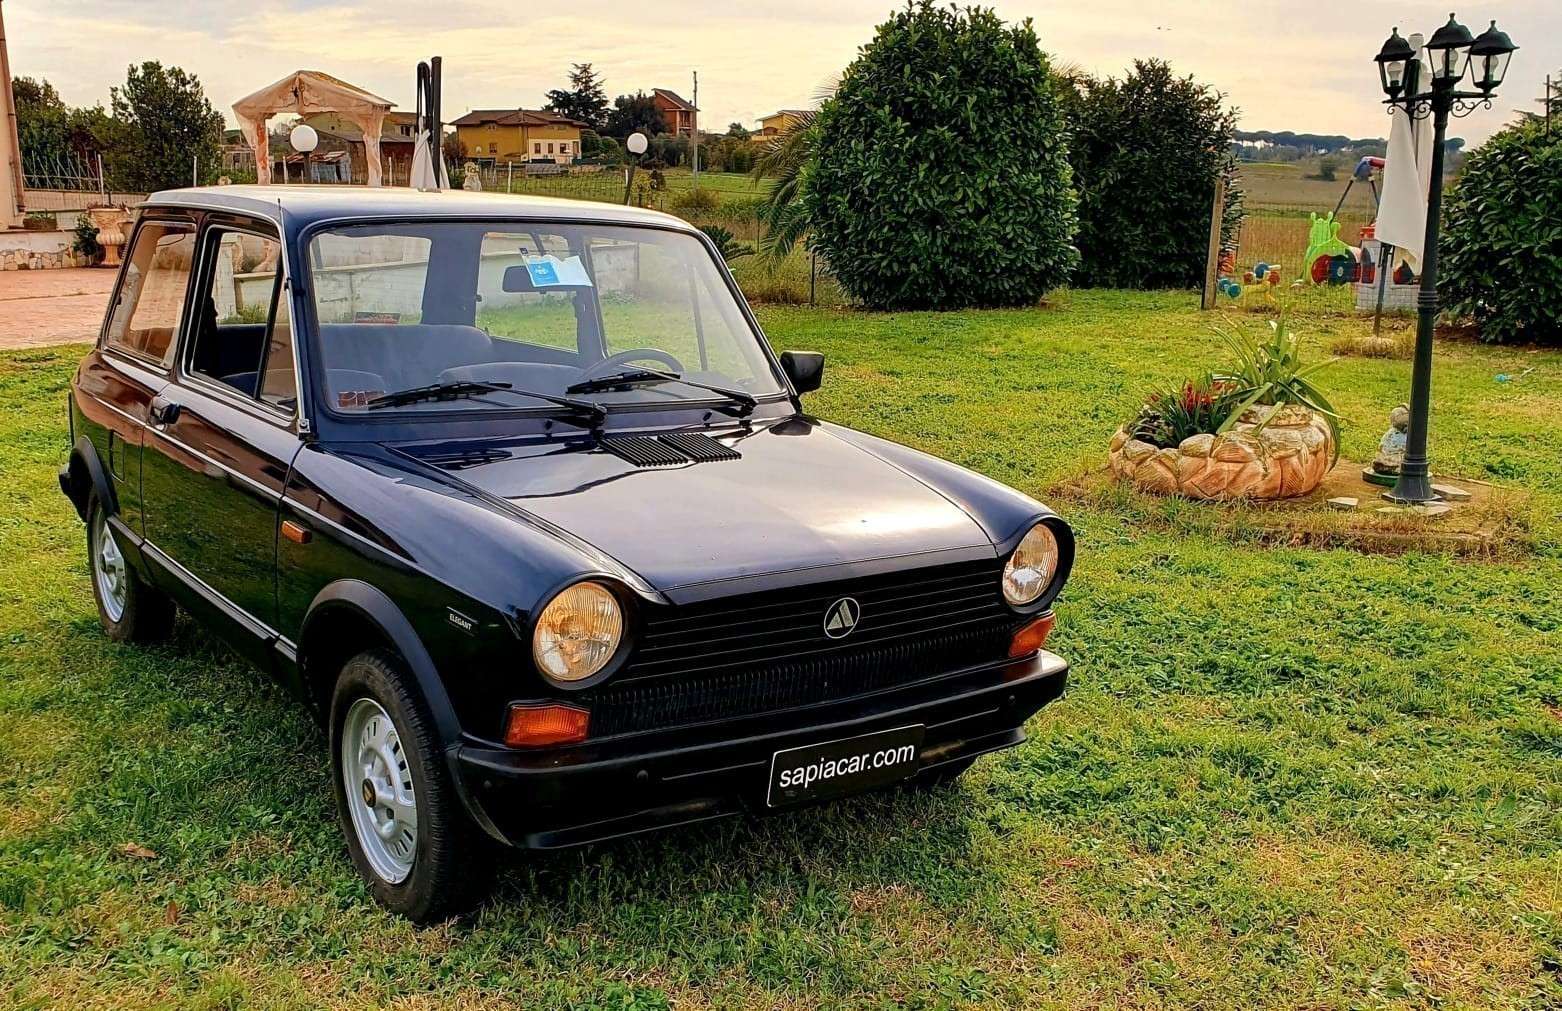 Autobianchi A 112 Sedan in Blue used in Roma - Rm for € 3,600.-